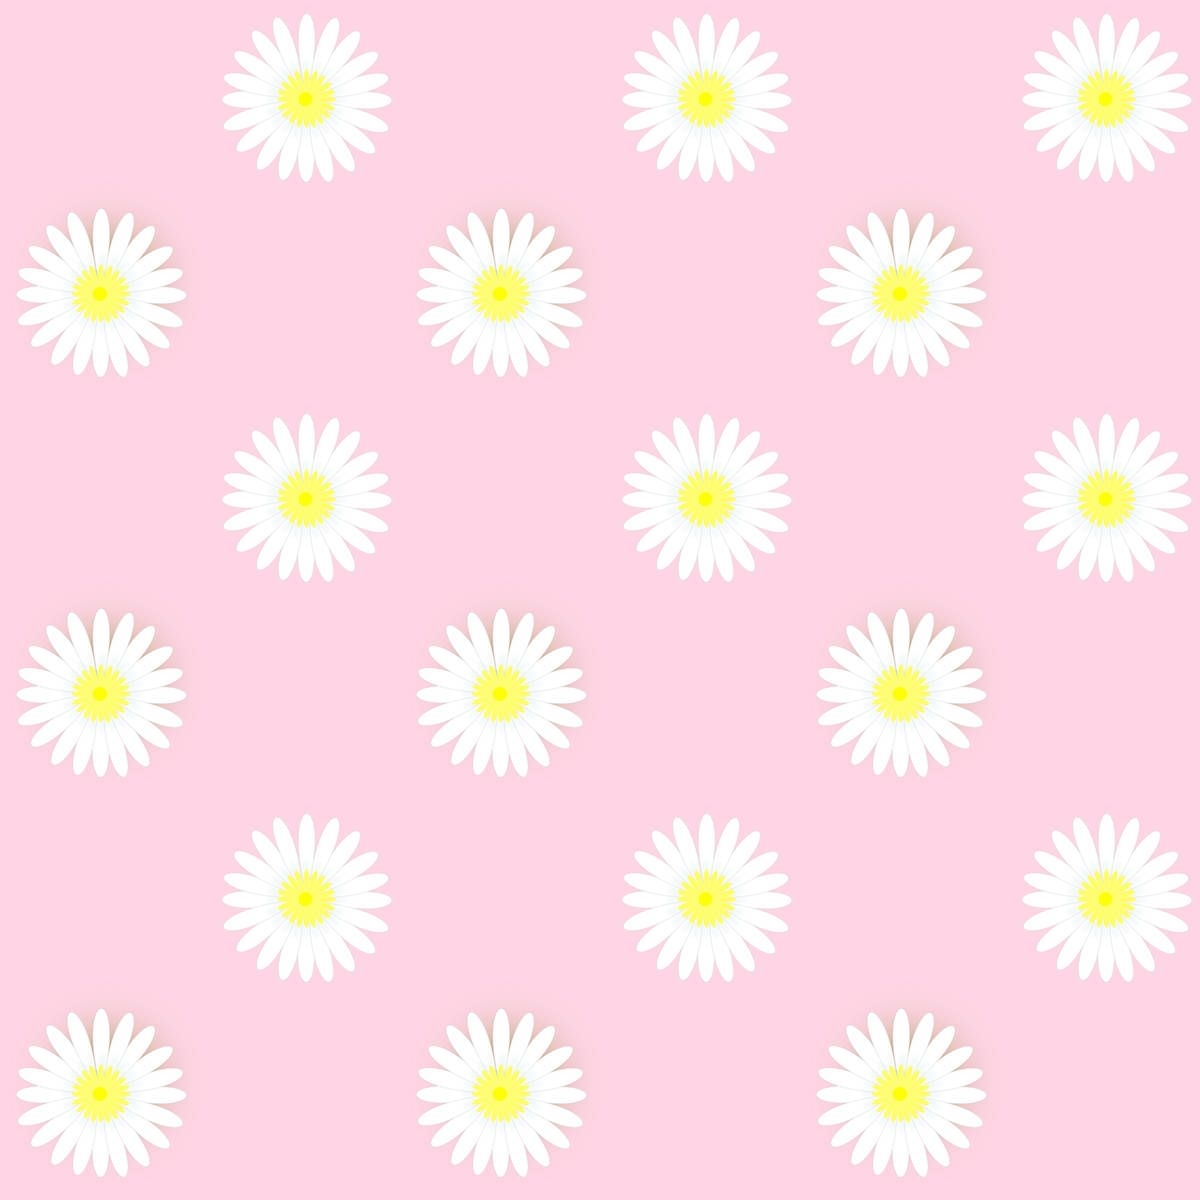 White Daisy Patterned In Pastel Pink